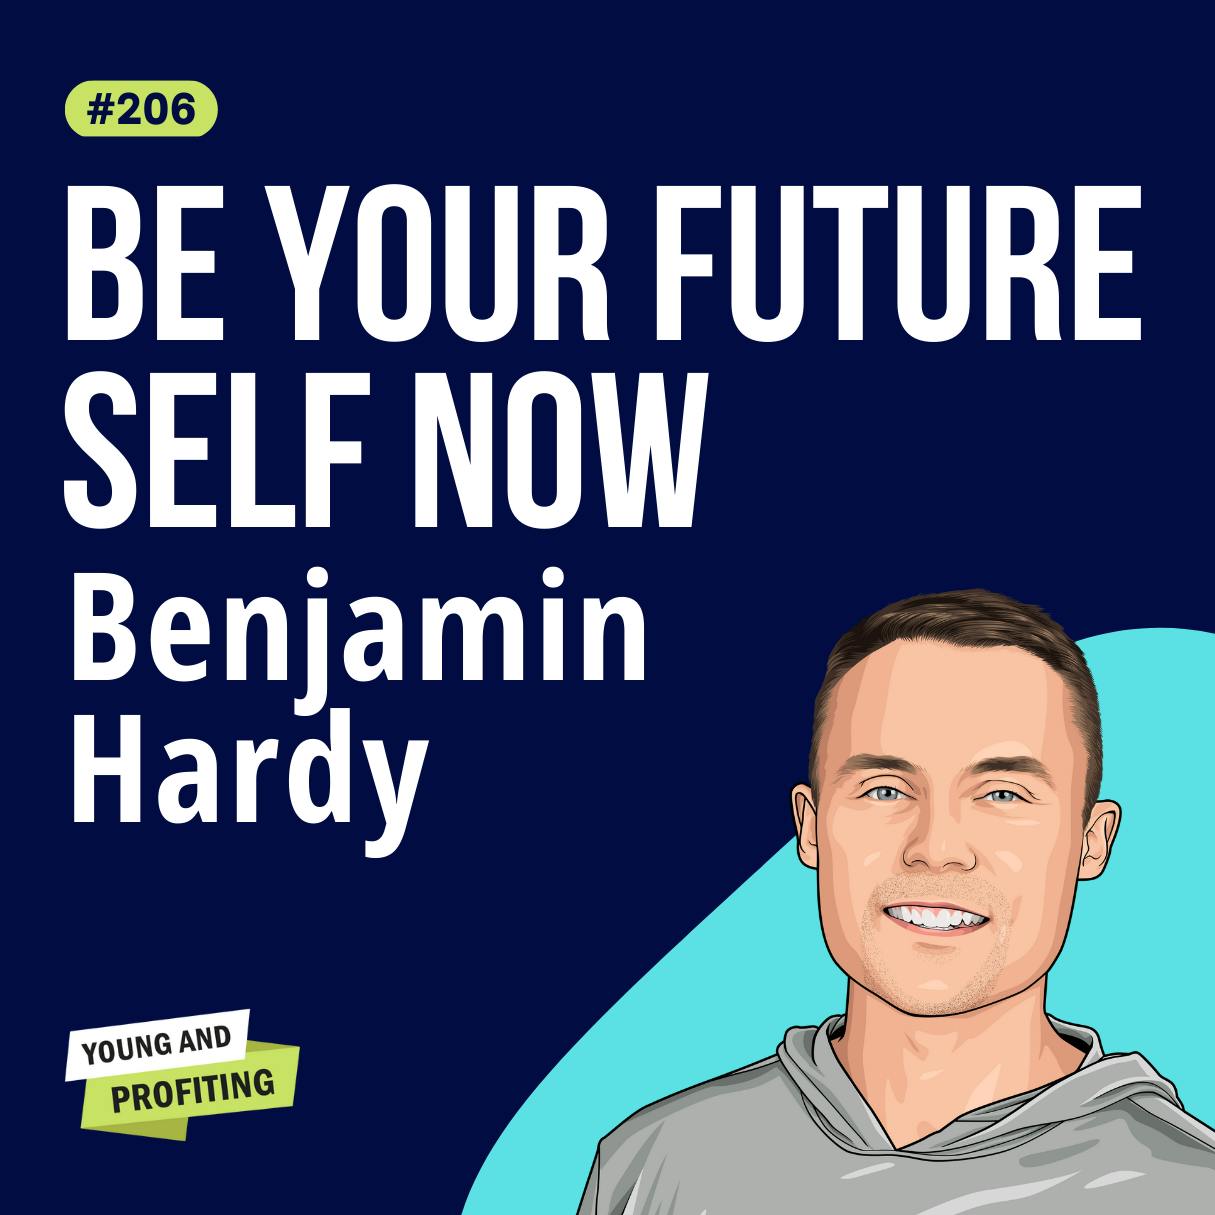 Benjamin Hardy: The #1 Personal Growth Hack in 2023, How to Change Your Identity and Make Better Choices | E206